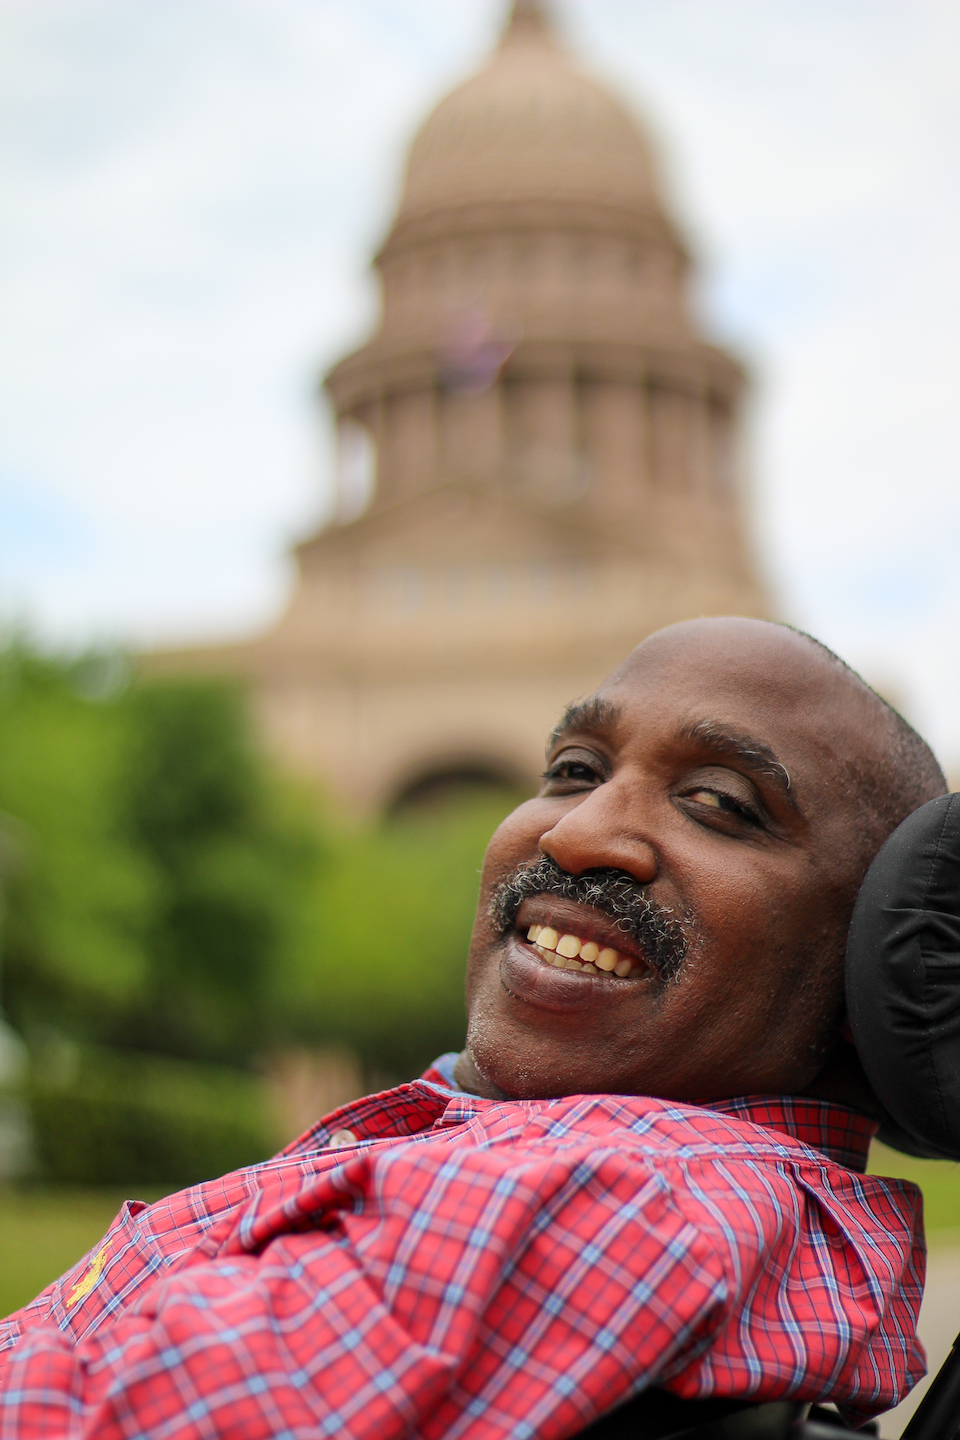 An image of Ricky Broussard, who is smiling and seated in his power wheelchair. He is wearing a red plaid shirt with a collar, and the Texas Capitol dome is in the distant background.